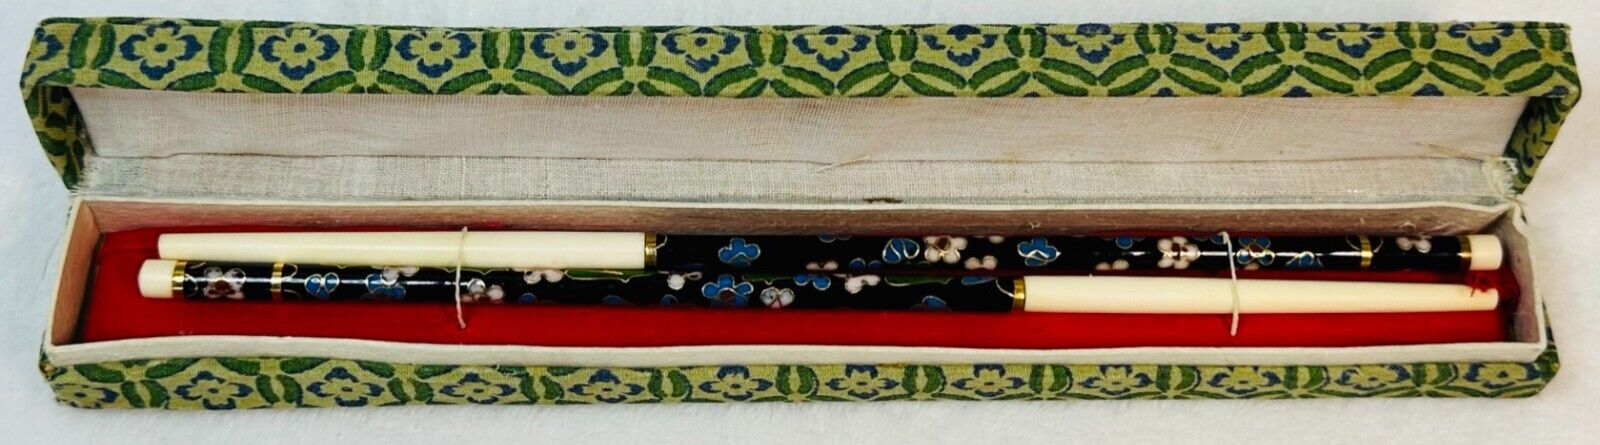 New Vintage Cloisonne Chinese Chopsticks floral enamel with box Green 8.5\